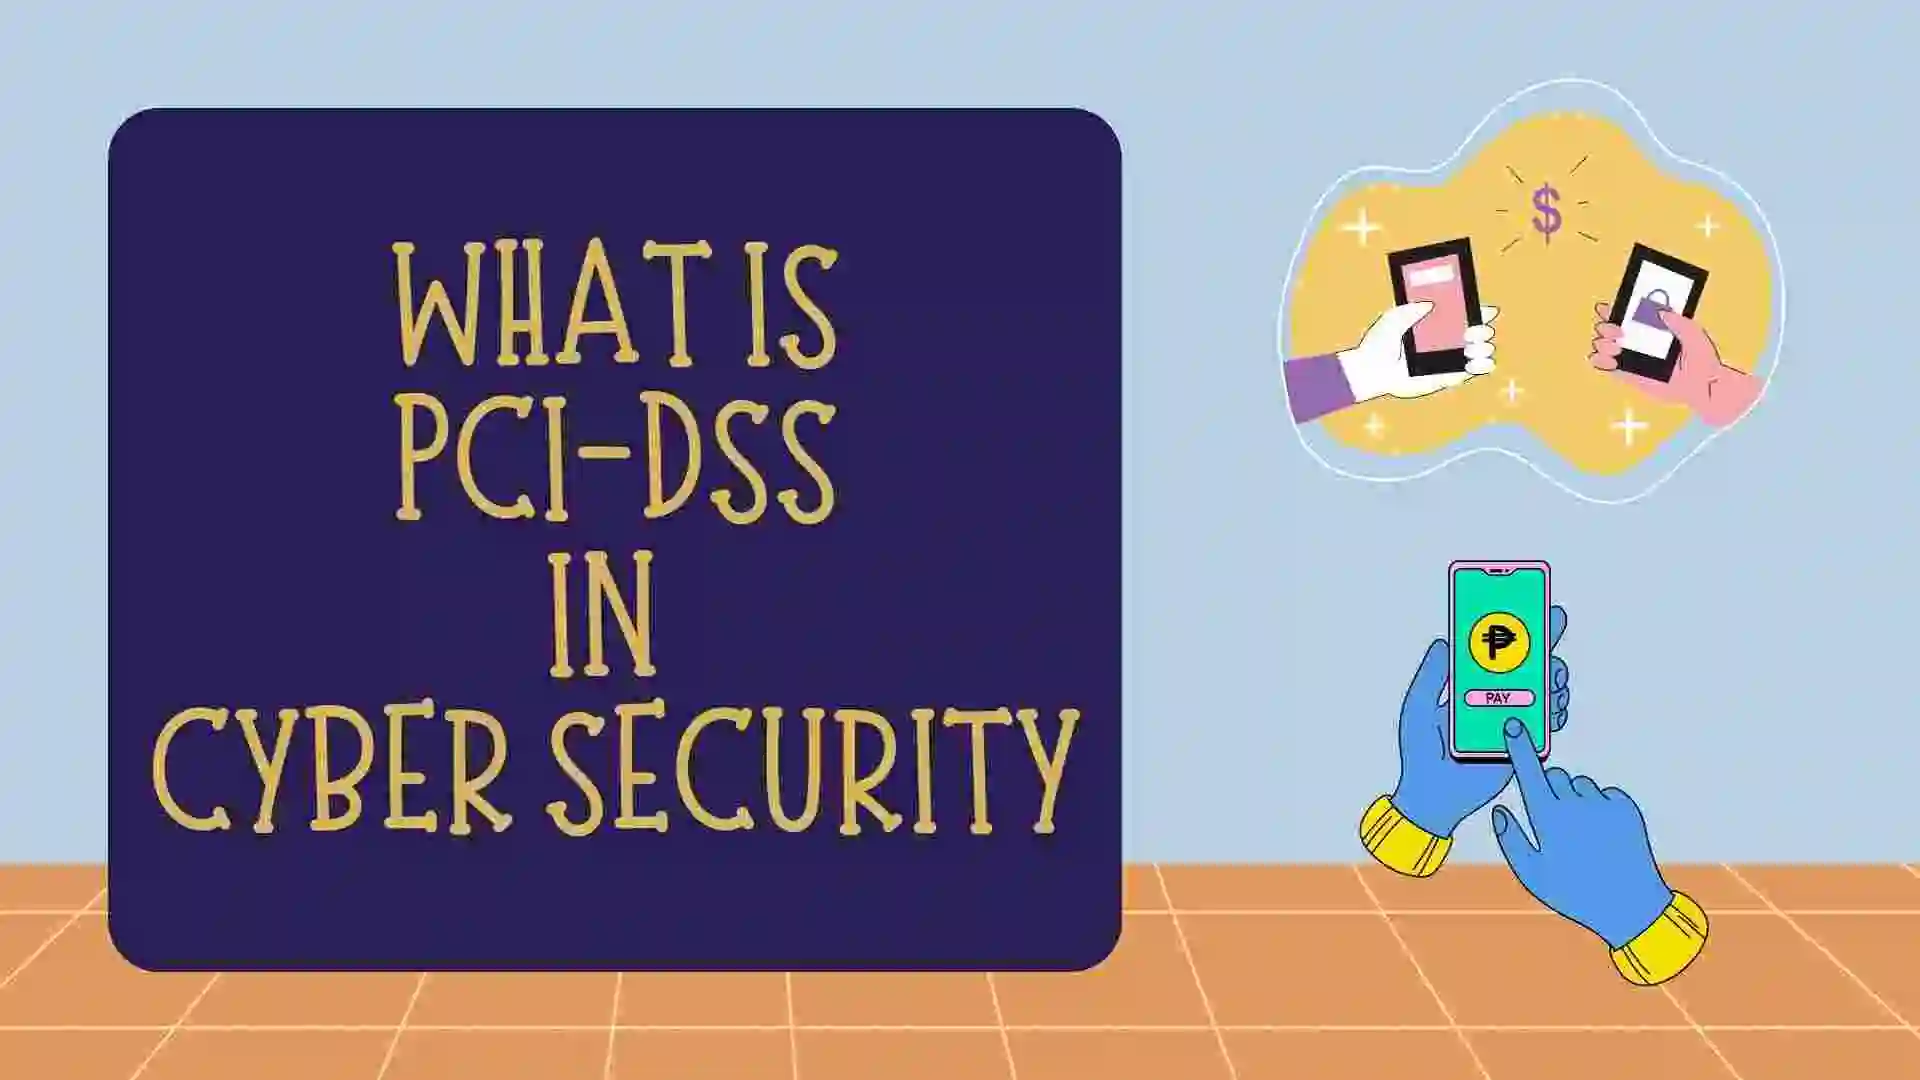 PCI DSS is a set of security standards to ensure the protection of sensitive payment card data during transactions and storage.